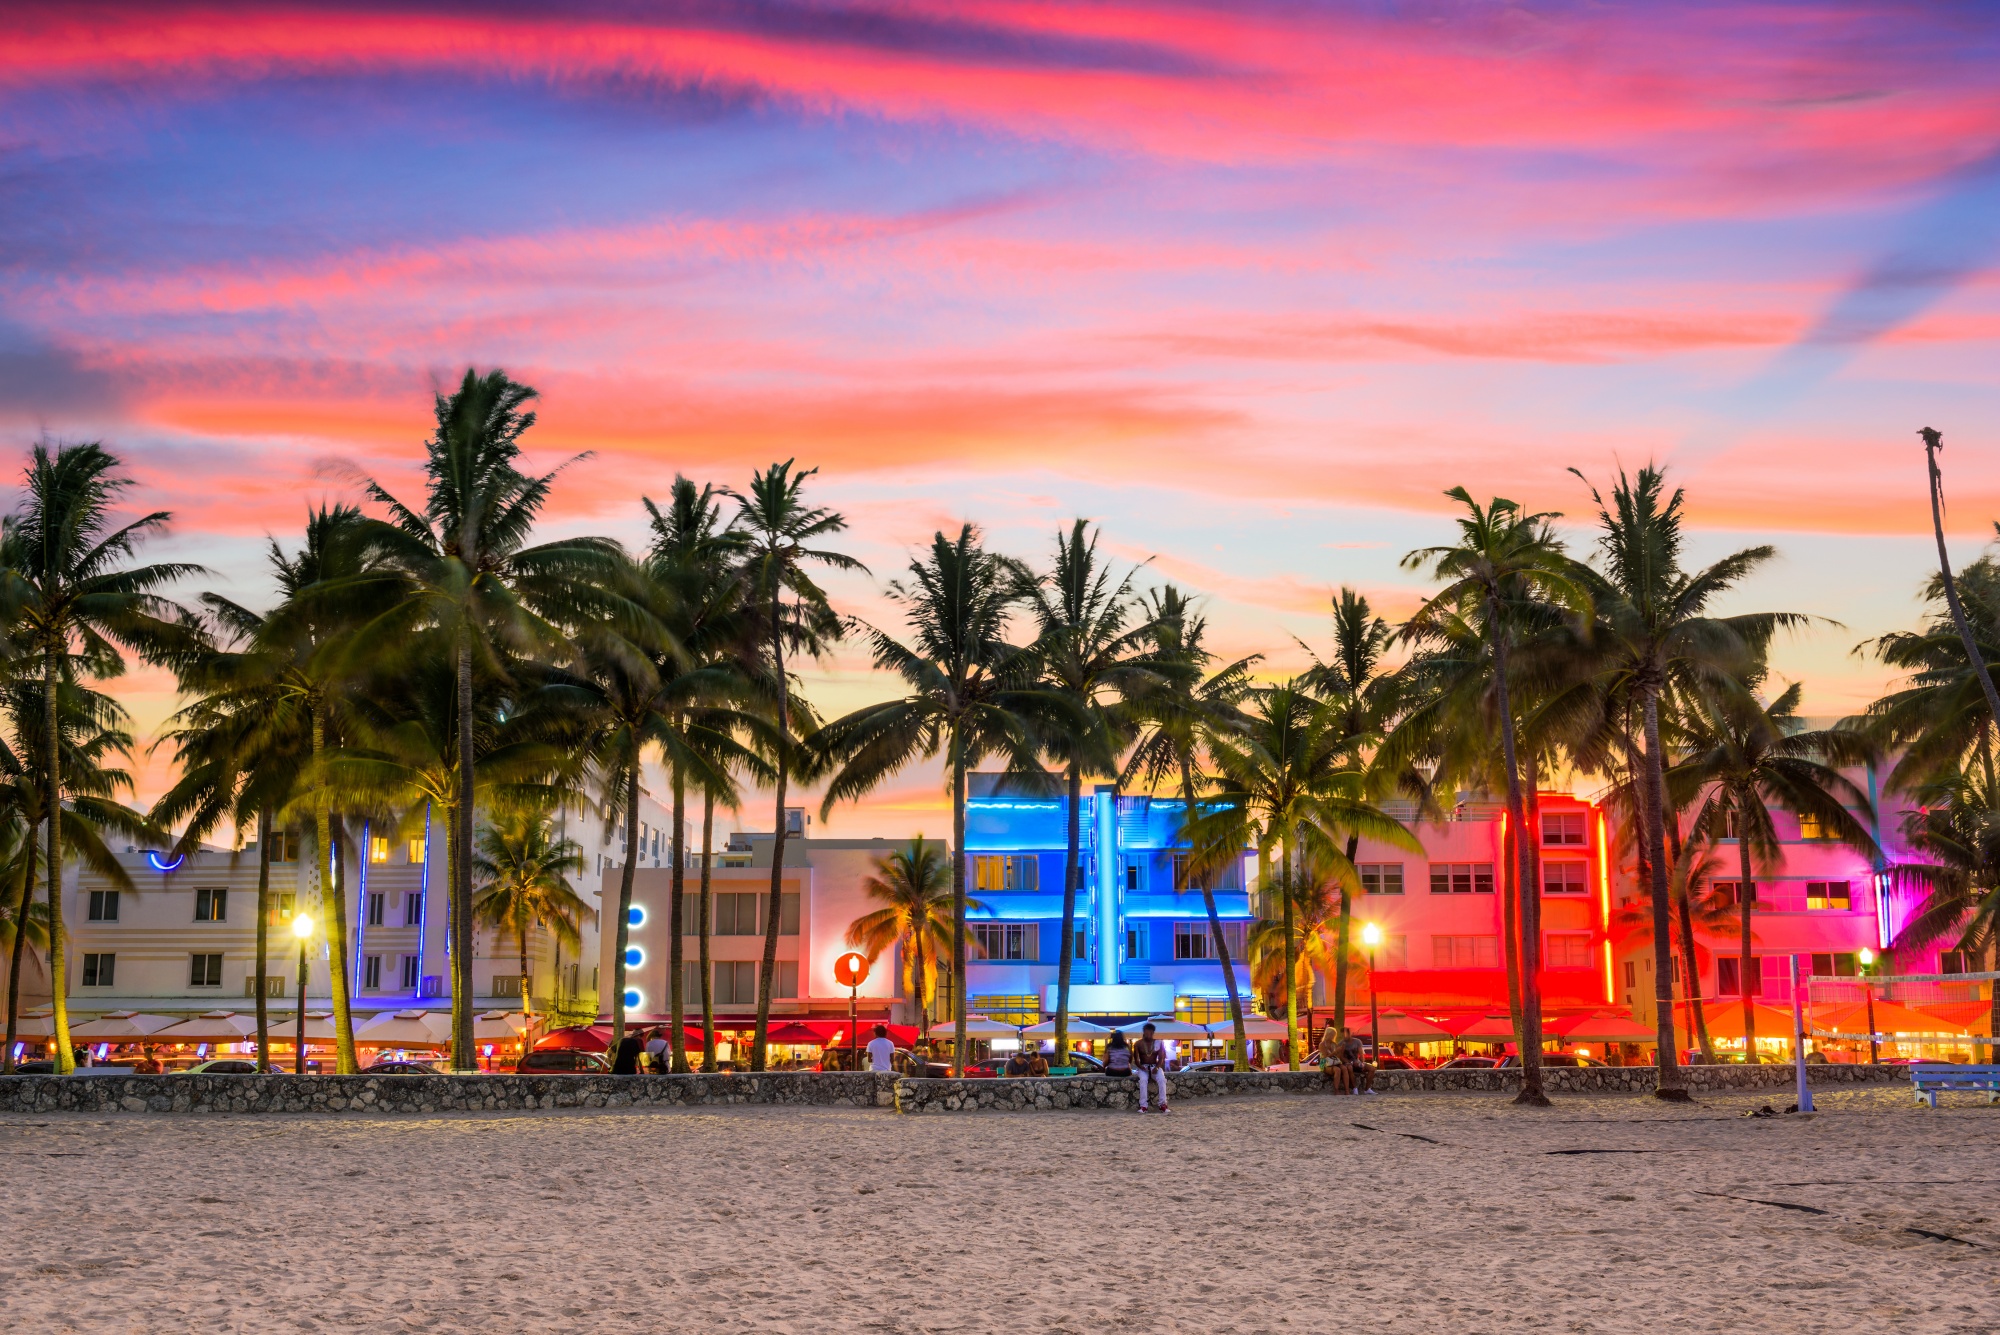 travel destinations for foodies, lit up hotels at sunset on Ocean Drive in Miami Beach, Florida